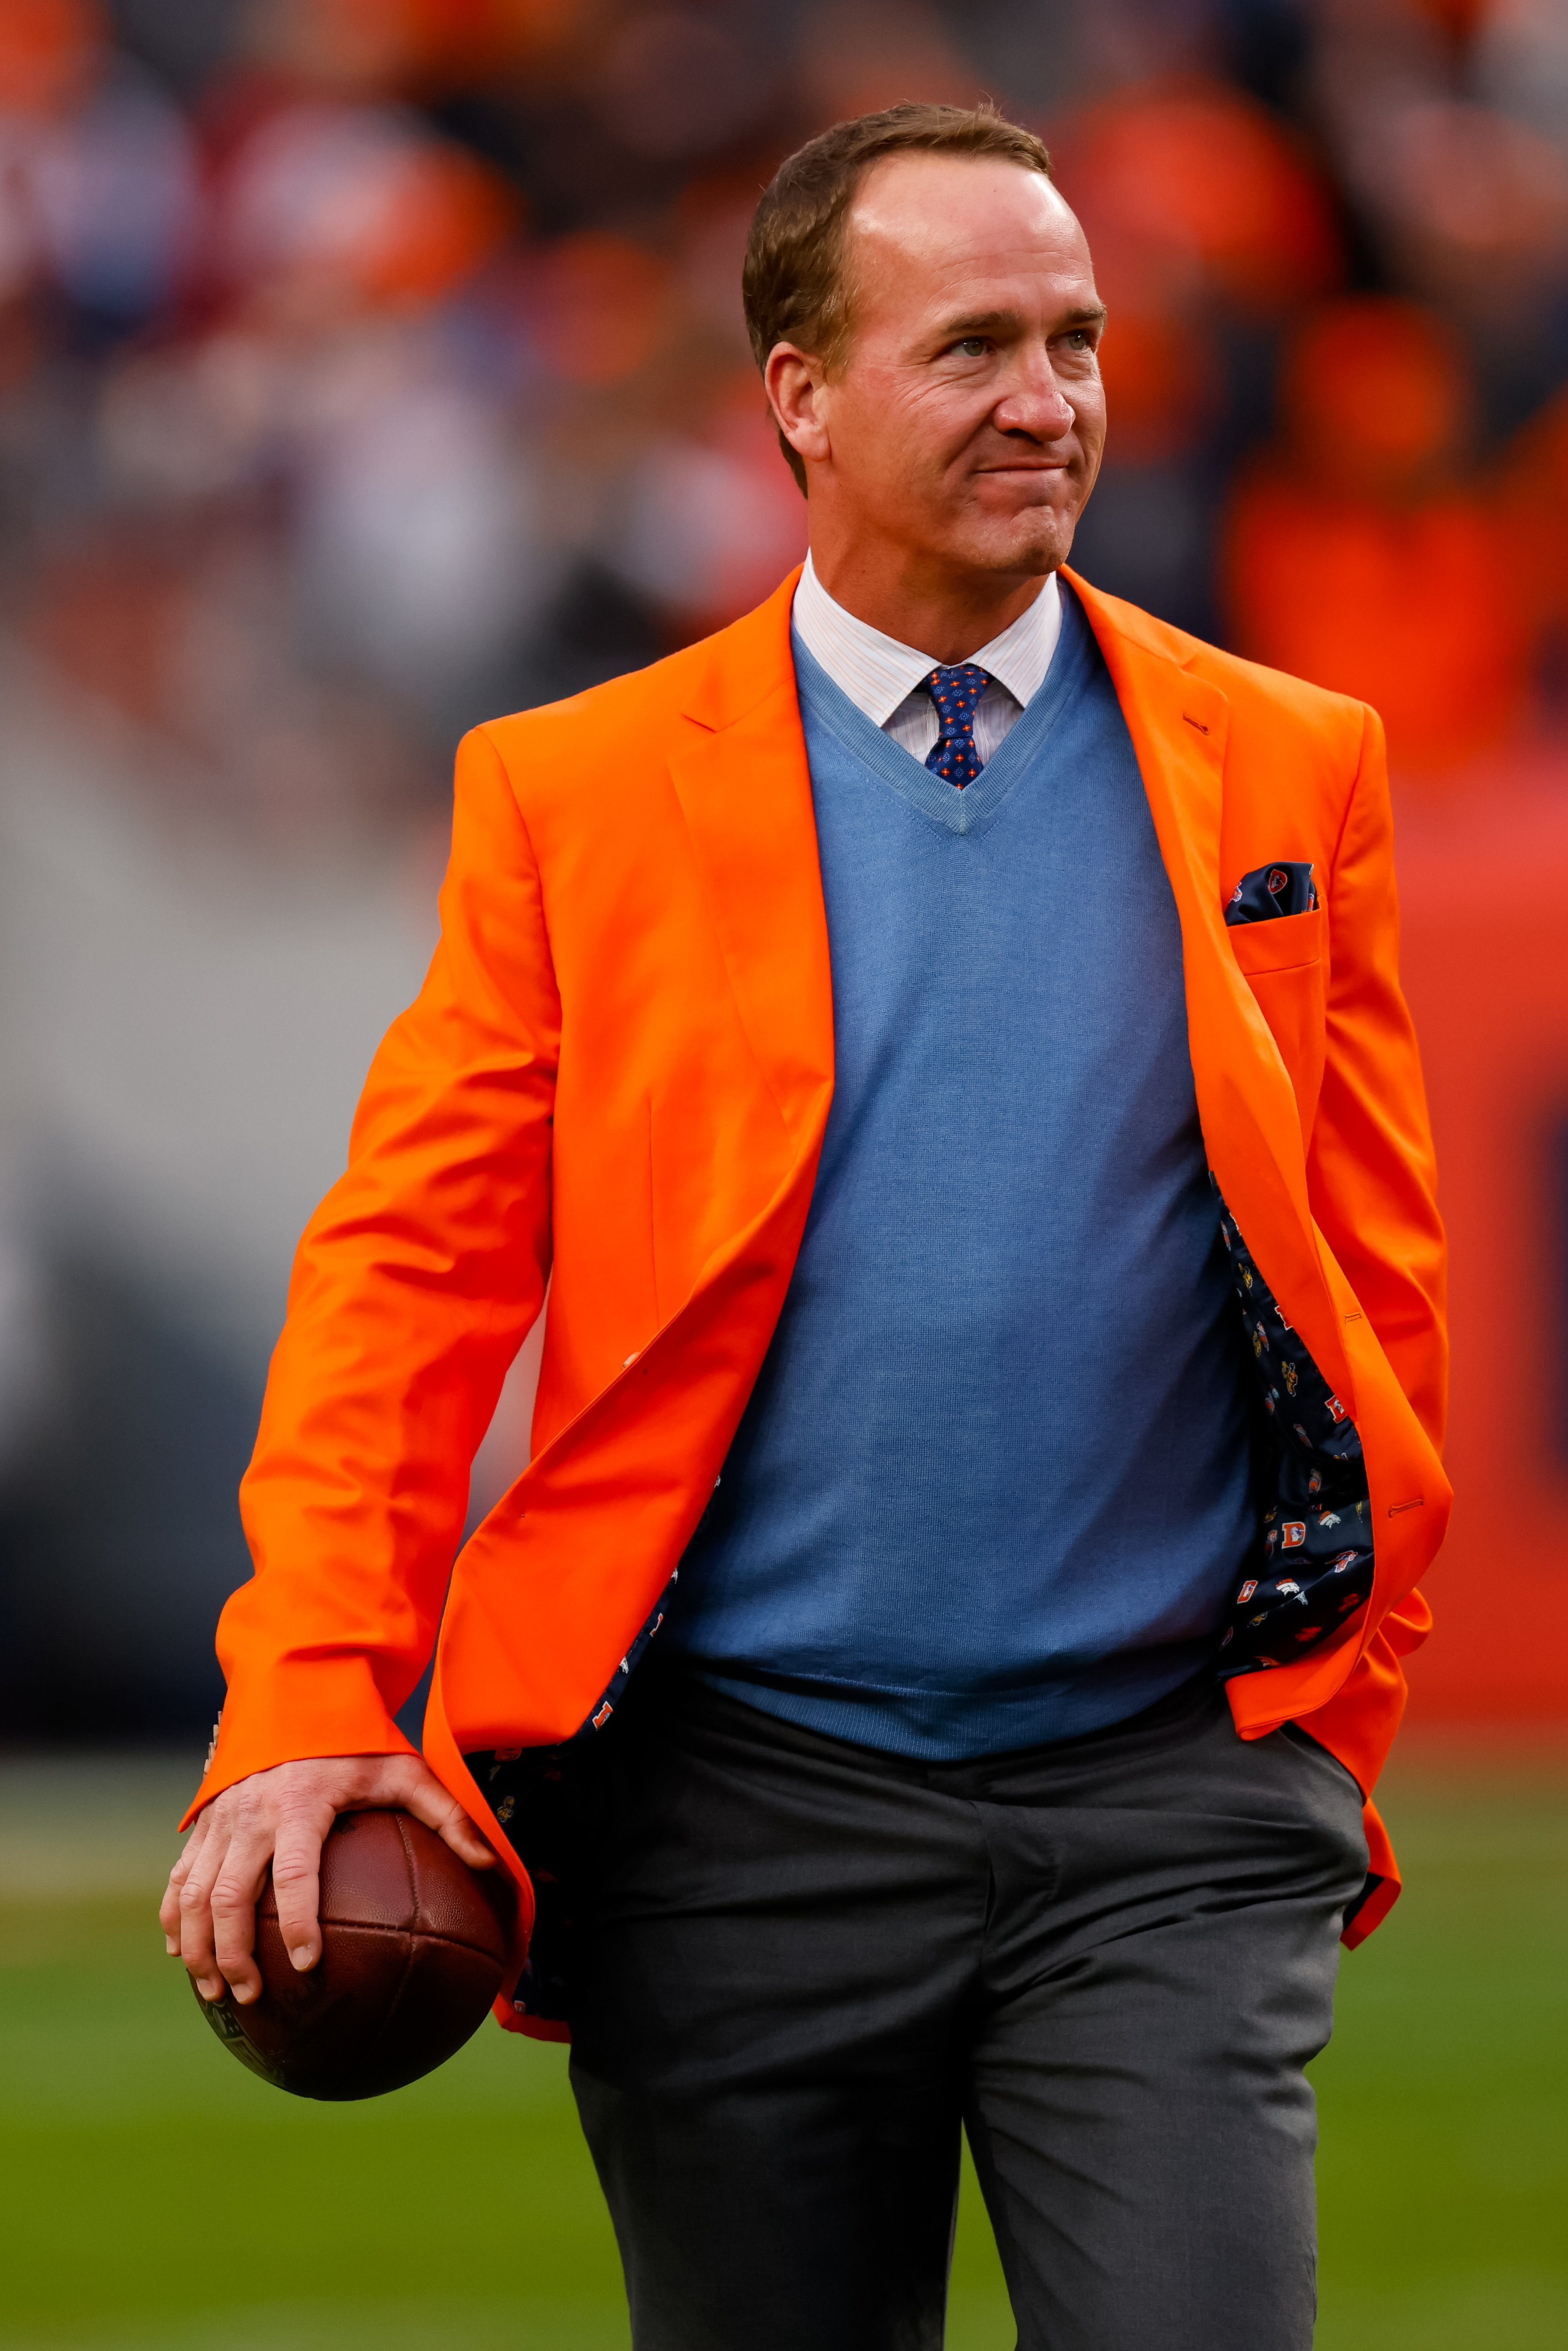 Peyton Manning on the field at a ceremony to enshrine him into the Broncos Ring of Fame in Denver on October 31, 2021 | Source: Getty Images